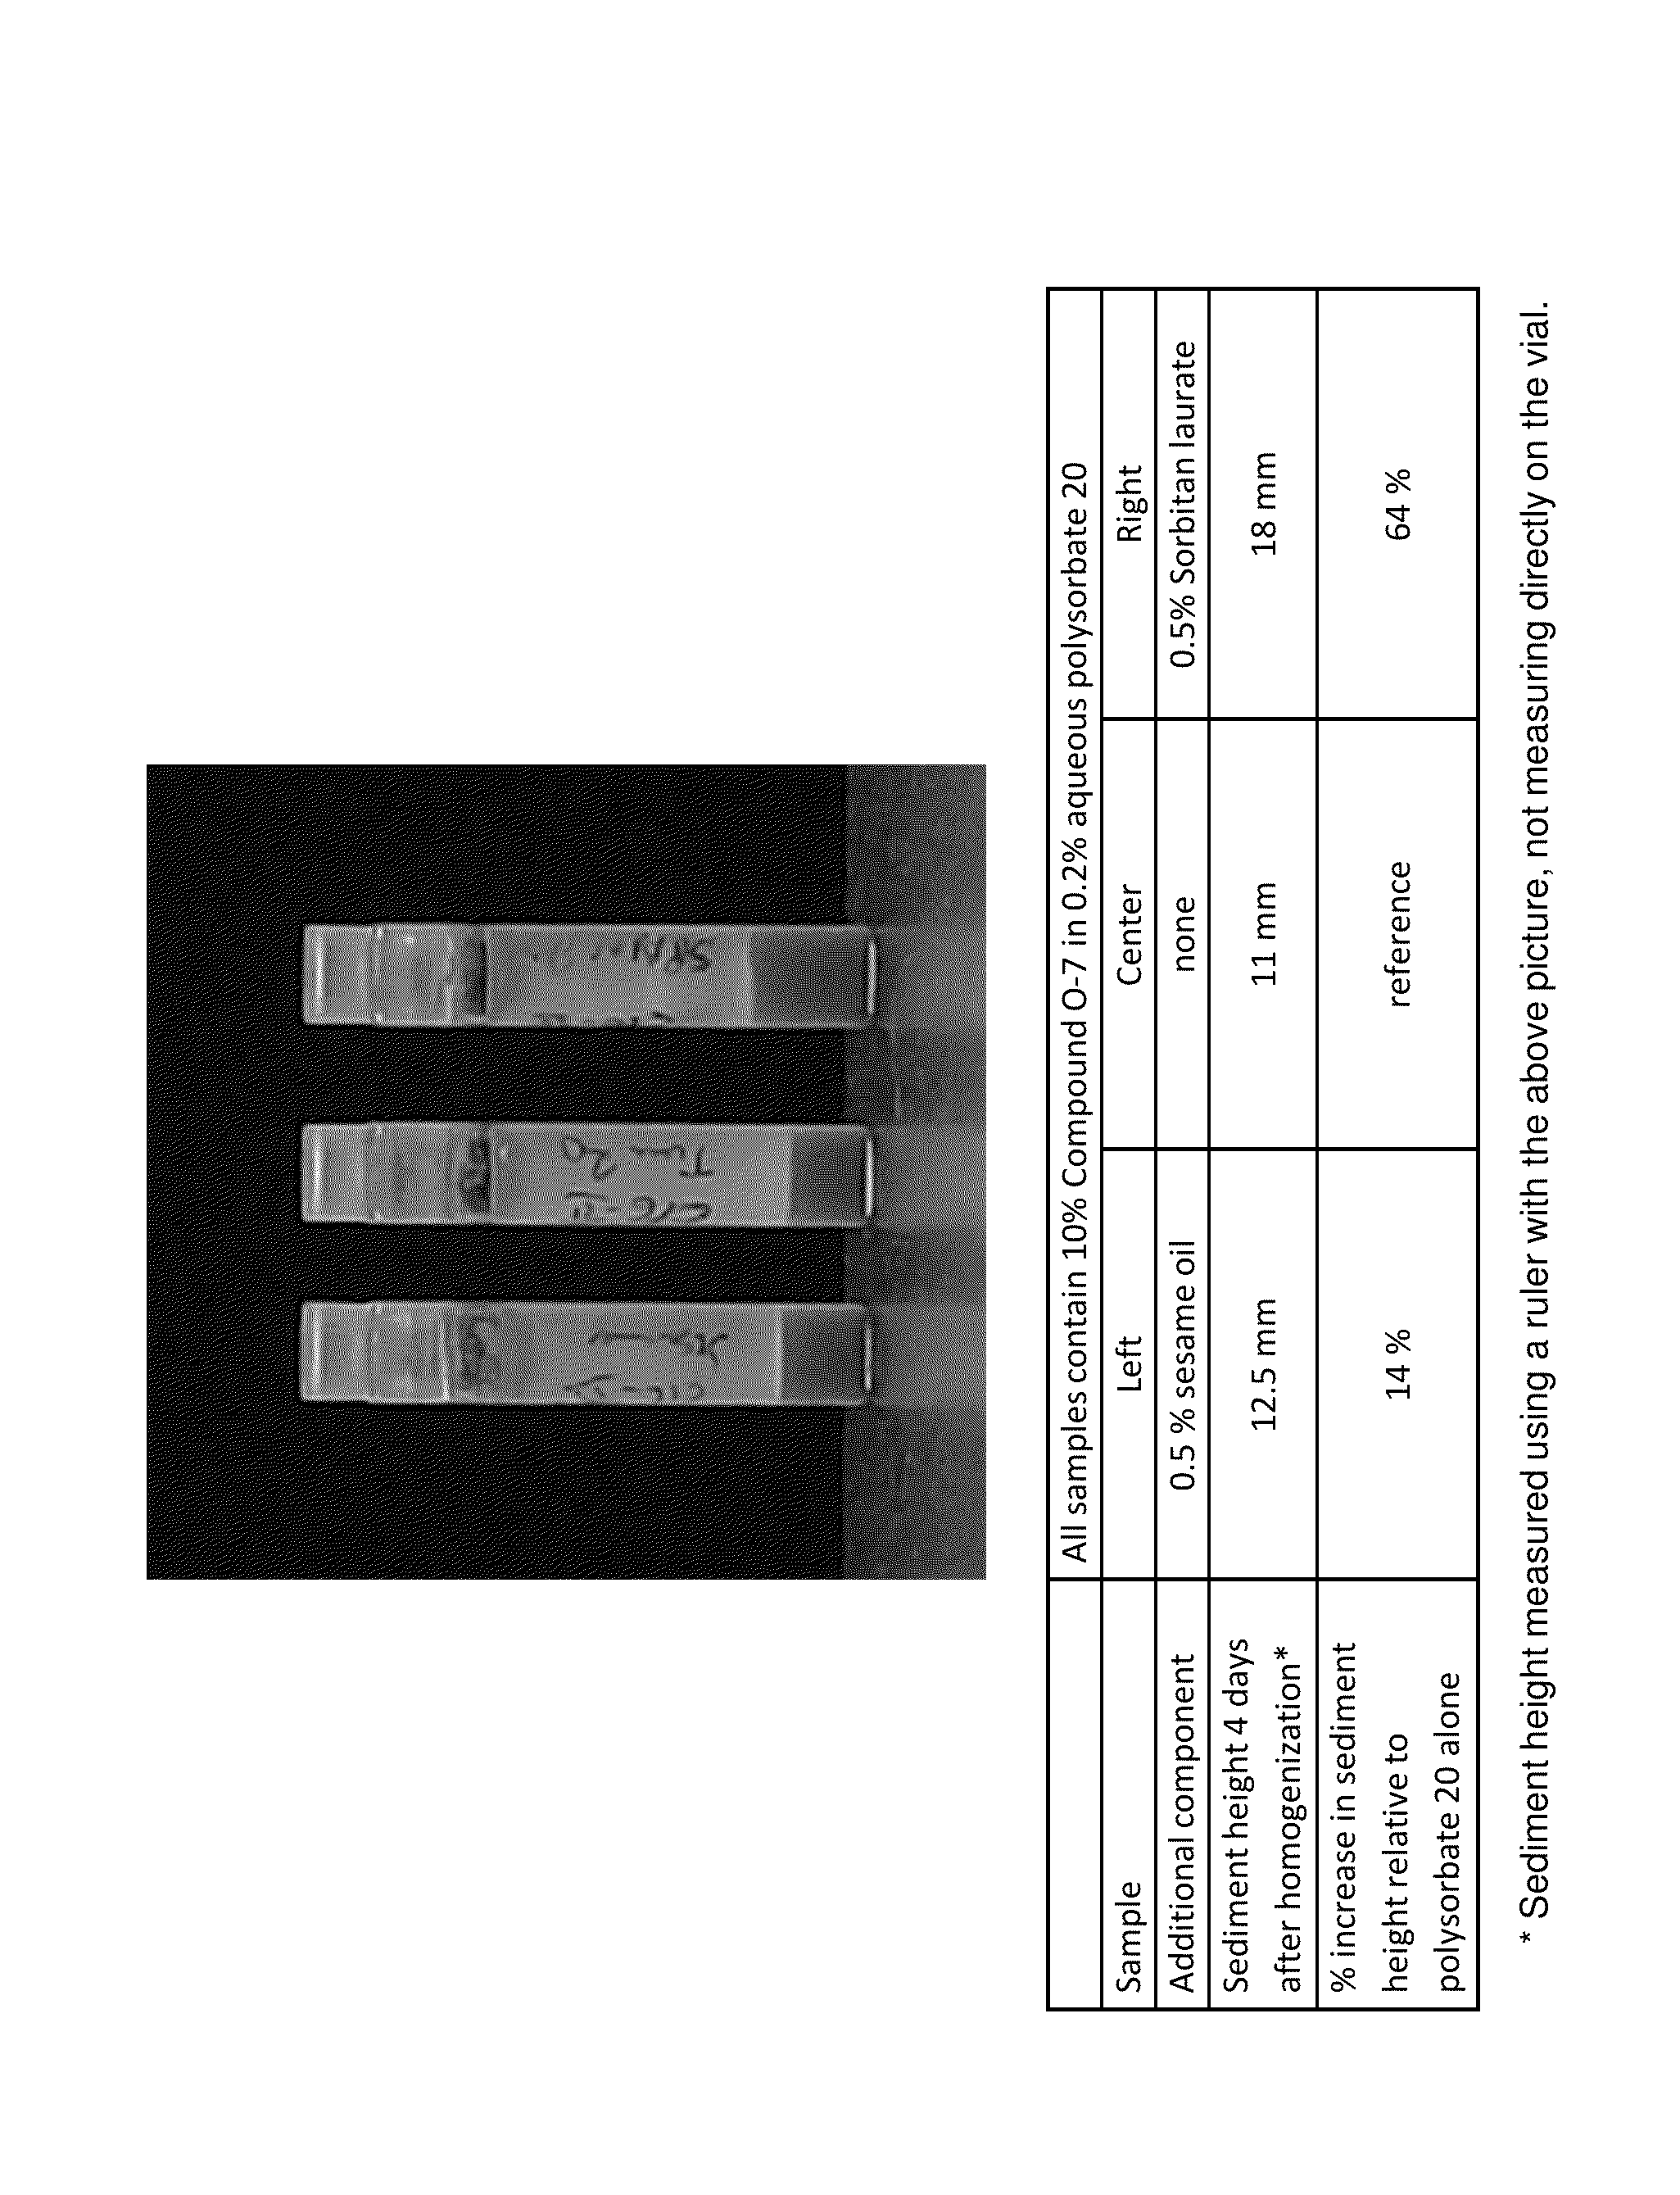 Pharmaceutical compositions comprising fatty glycerol esters